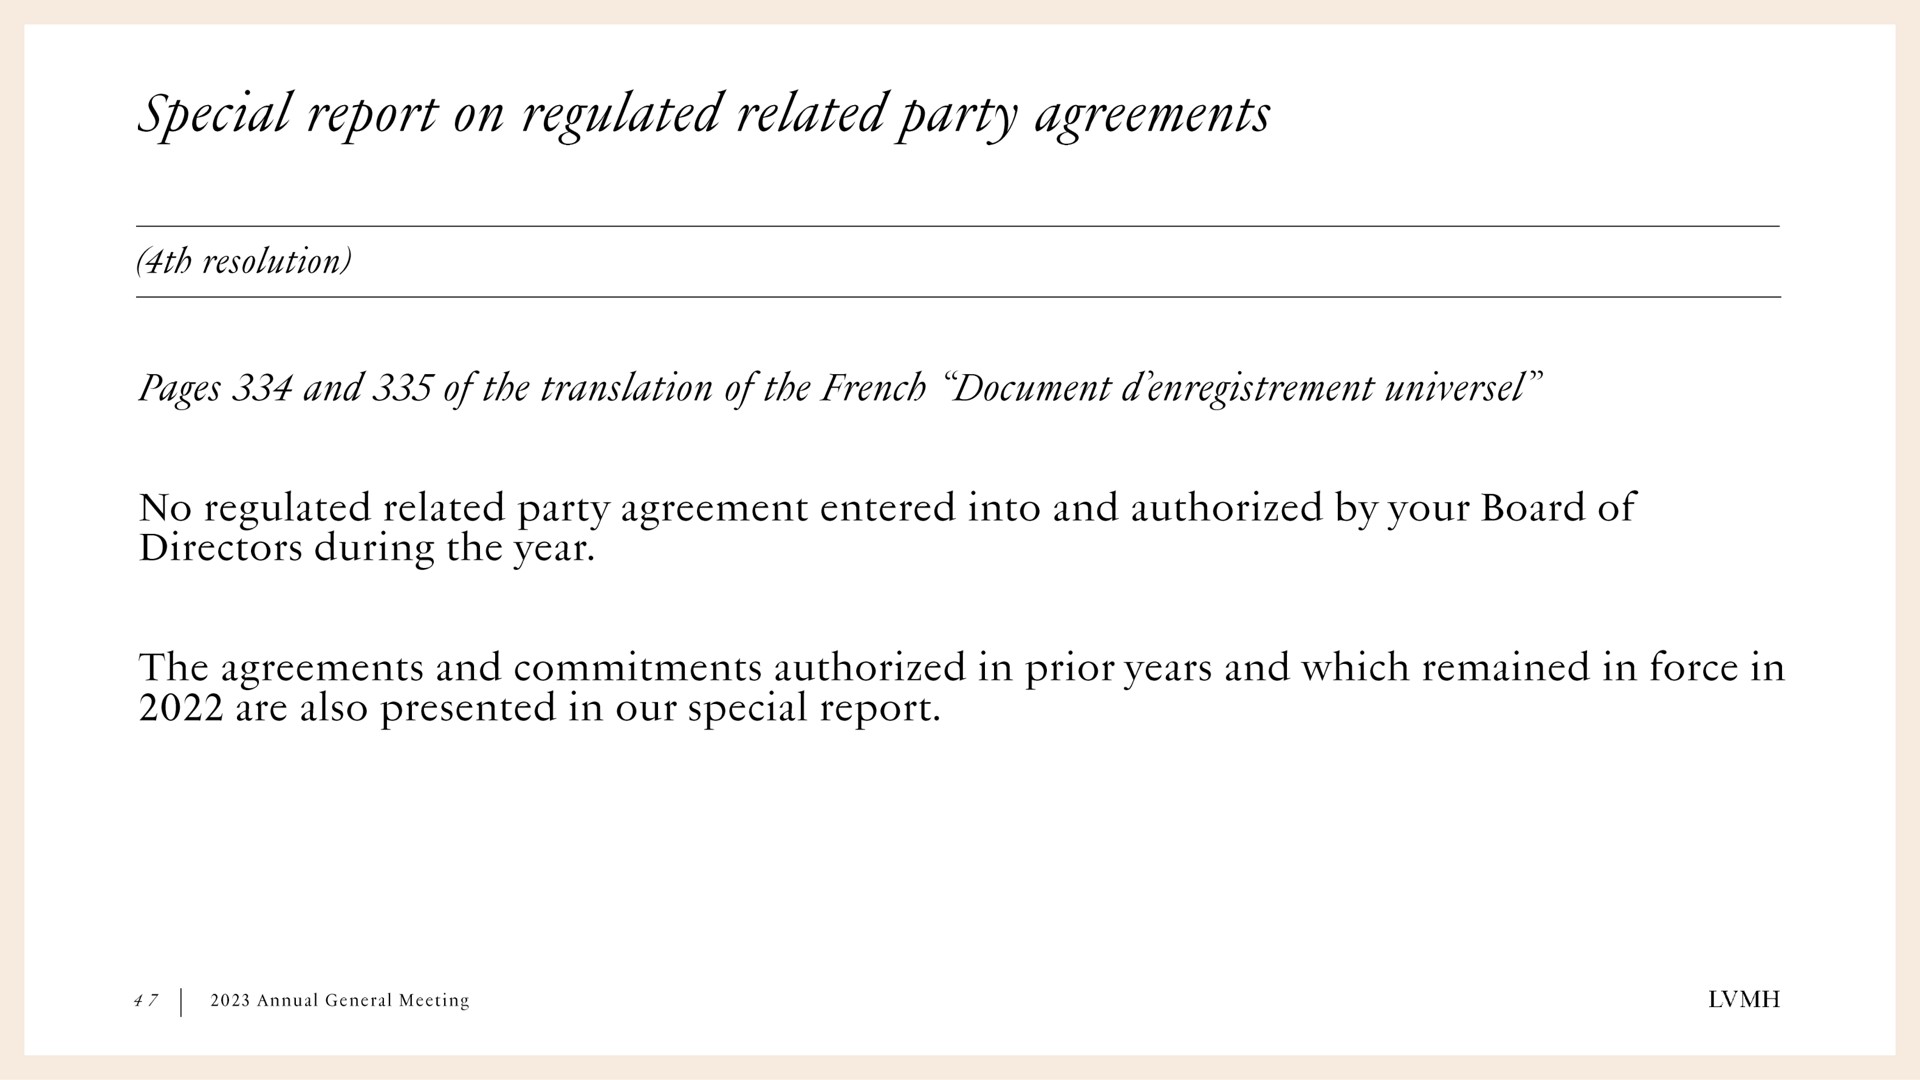 special report on regulated related party agreements | LVMH